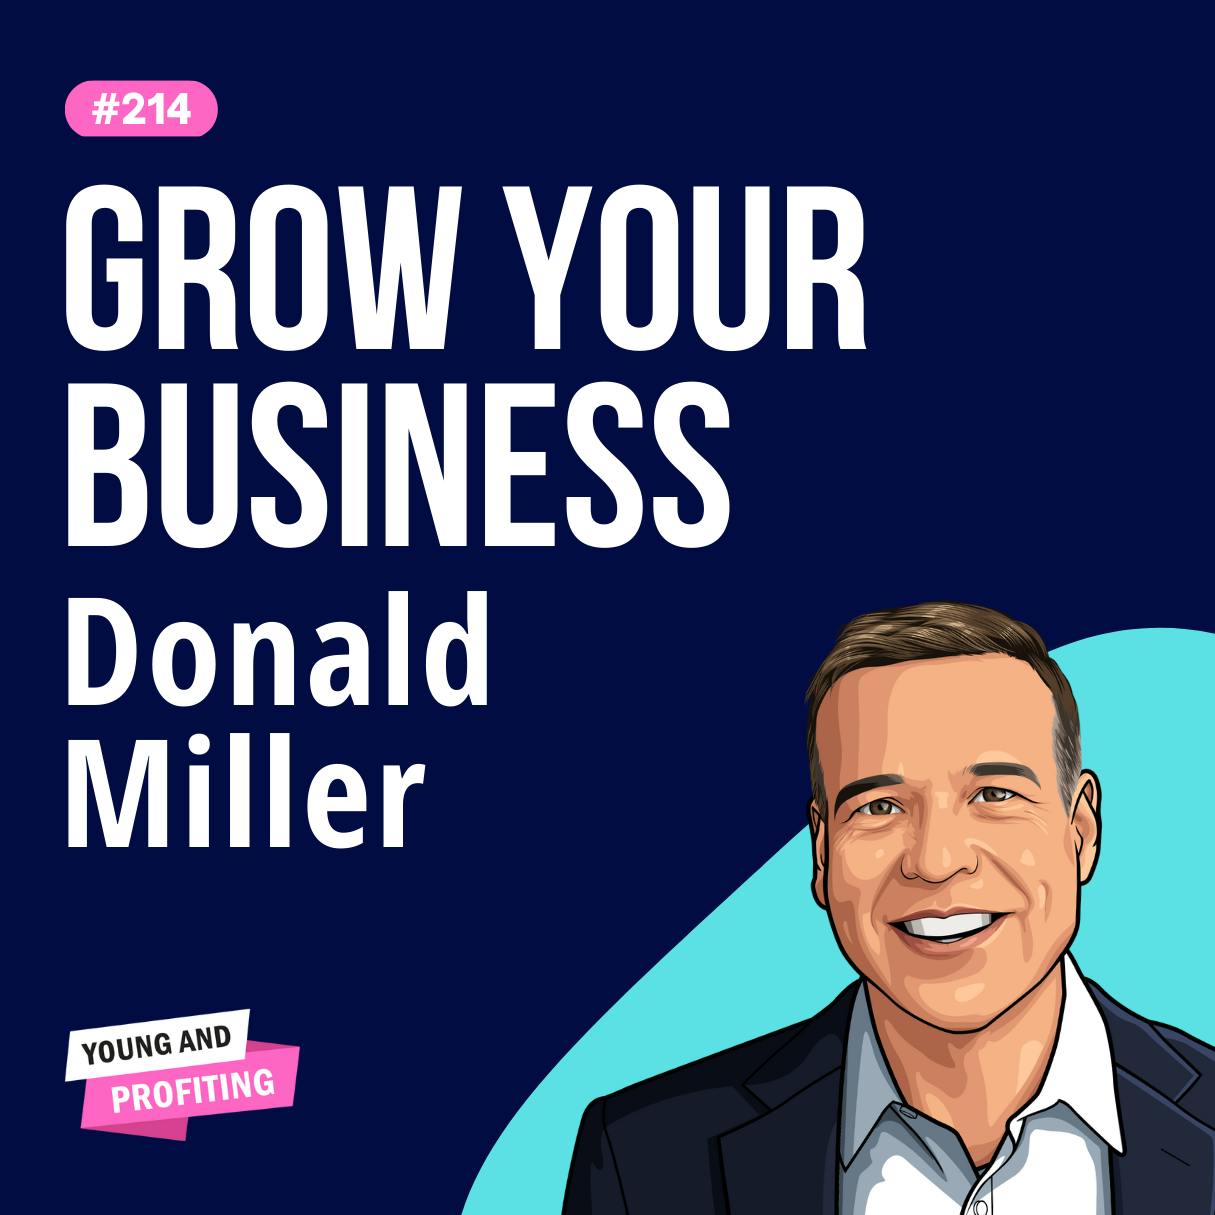 Donald Miller: How To Make Your First Million, 6 Steps To Grow Your Small Business in 2023 | E214 by Hala Taha | YAP Media Network